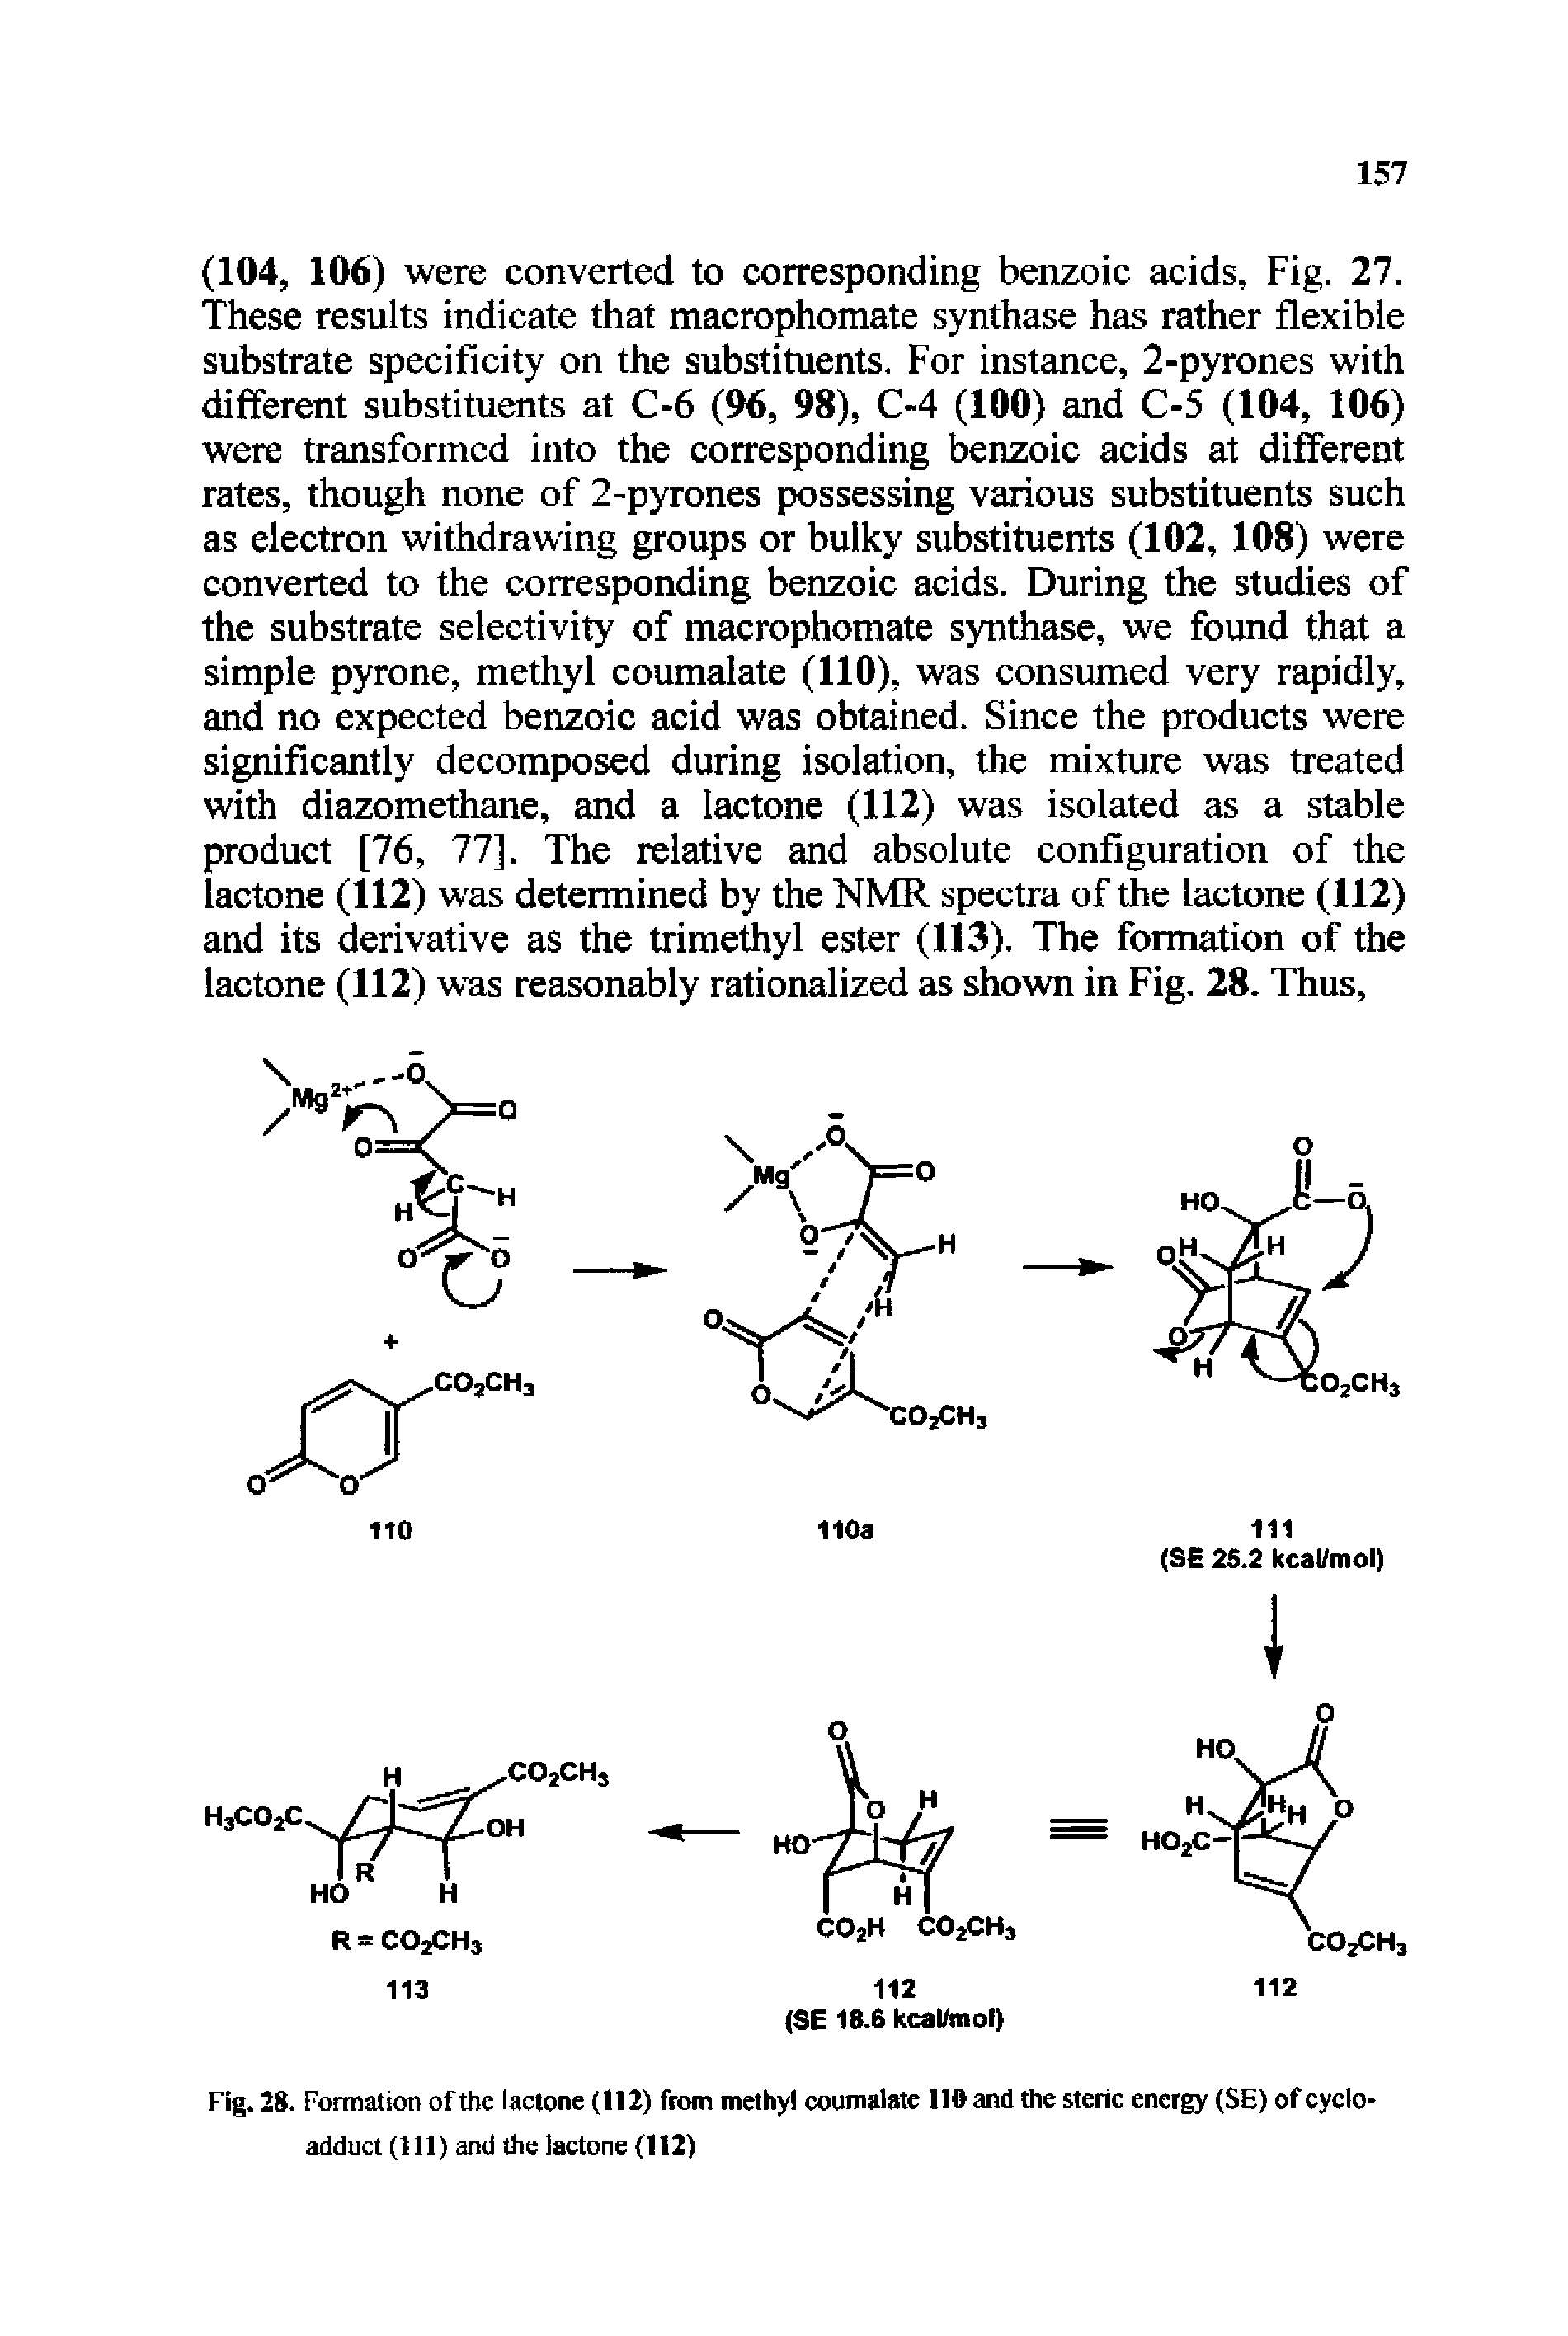 Fig. 28. Formation of the lactone (112) from methyl coumalate 116 and the steric energy (SE) of cycloadduct (111) and the lactone (112)...